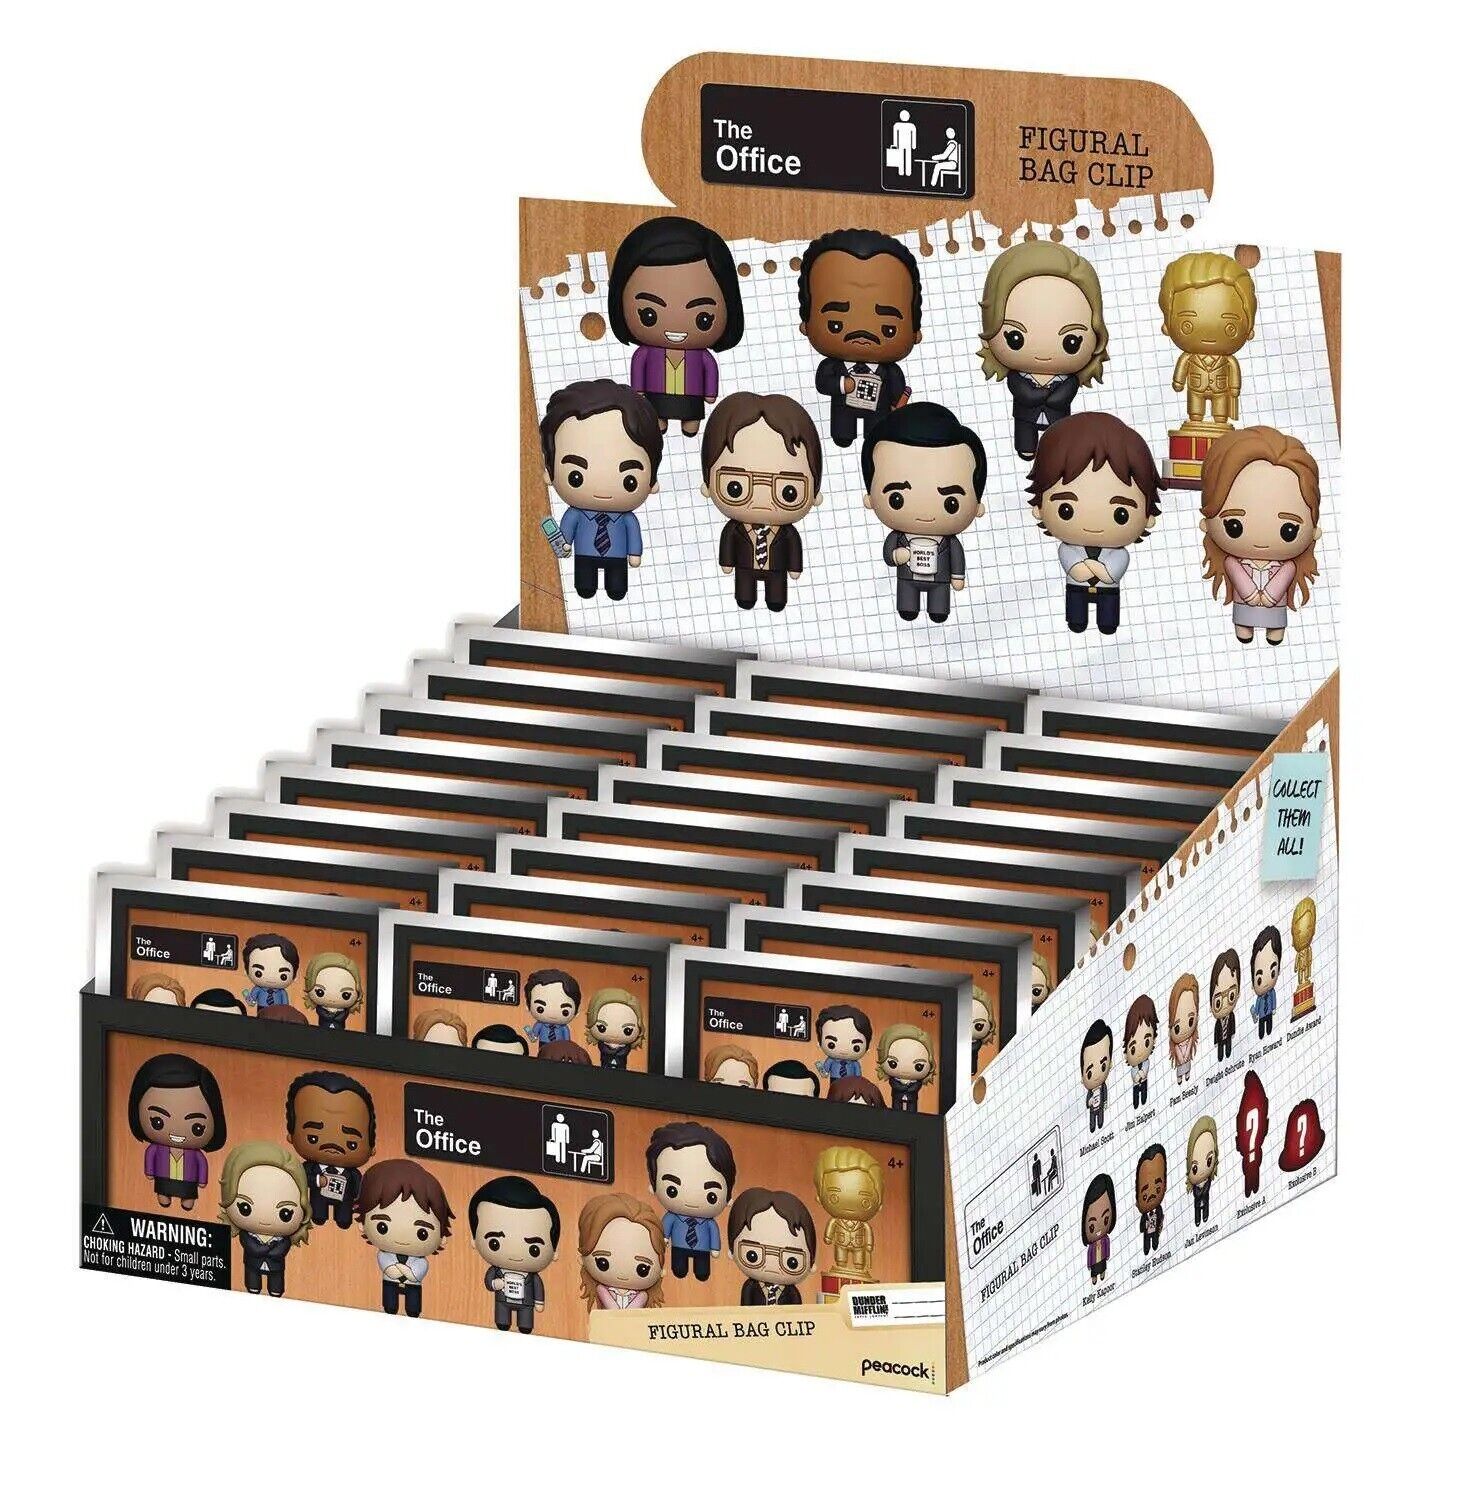 WHOLE BOX - 24pcs THE OFFICE TV SHOWS - 3D Foam Bag Clip in 24x Blind Bags